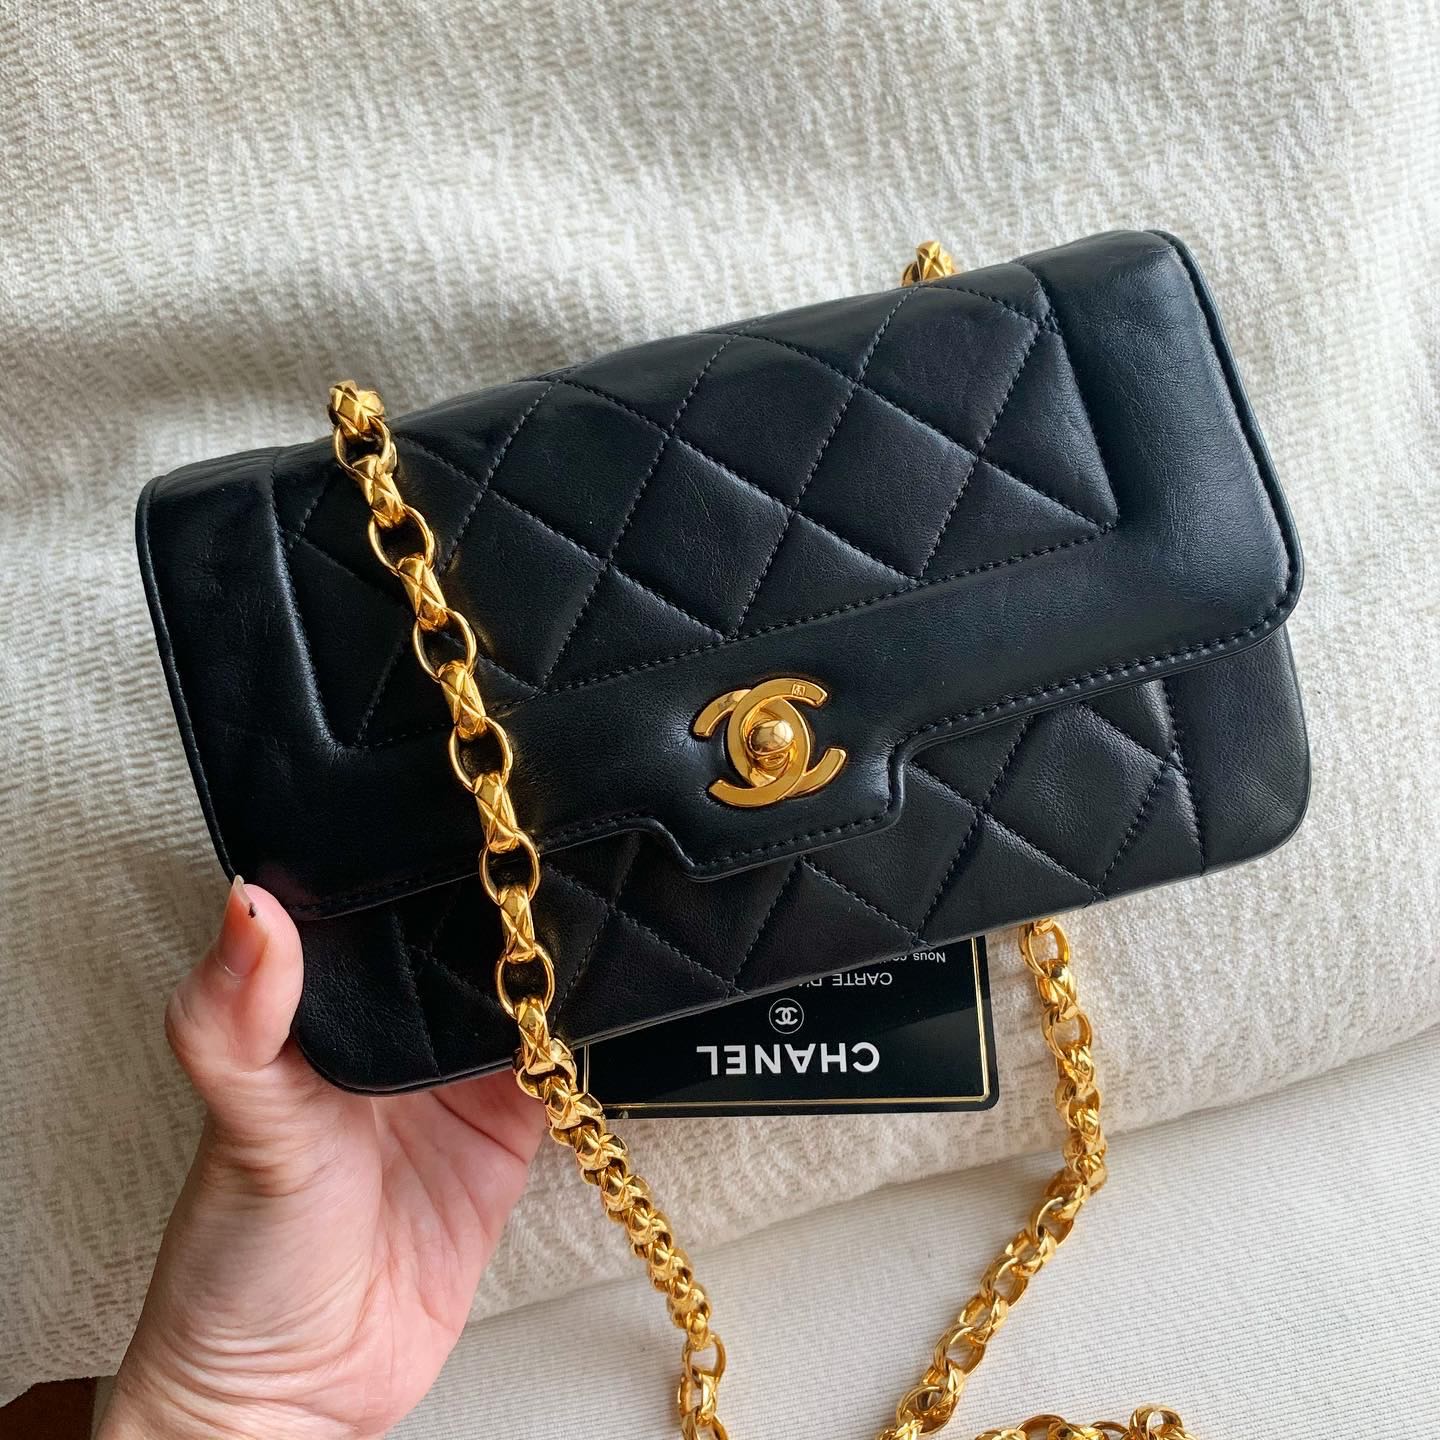 CHANEL Pre-Owned 1992 CC diamond-quilted Tassel Shoulder Bag - Farfetch